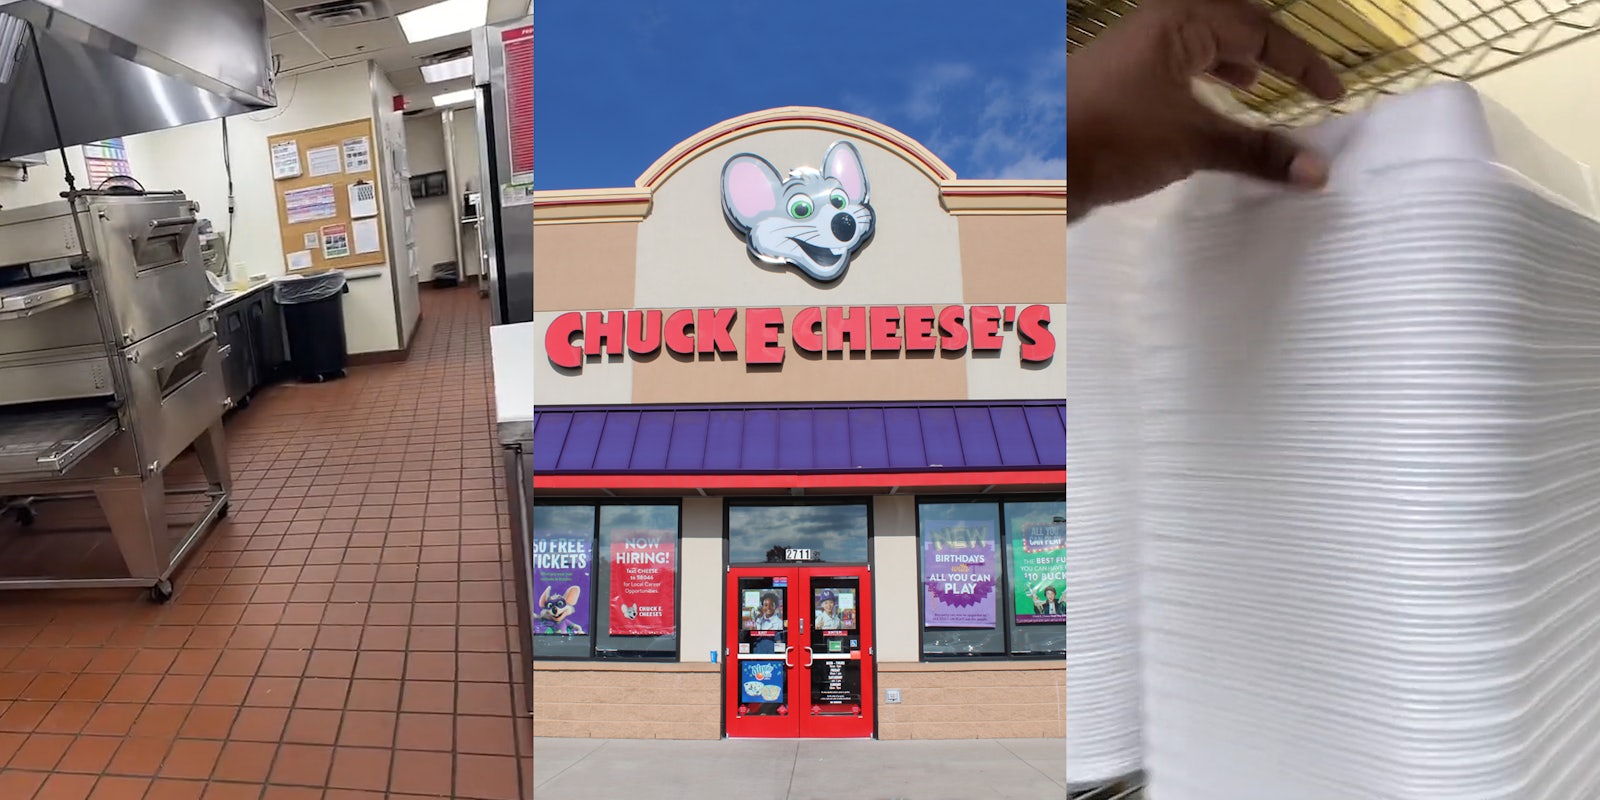 Chuck E Cheese's kitchen (l) Chuck E Cheese's building with sign (c) woman grabbing to go box from stack (r)